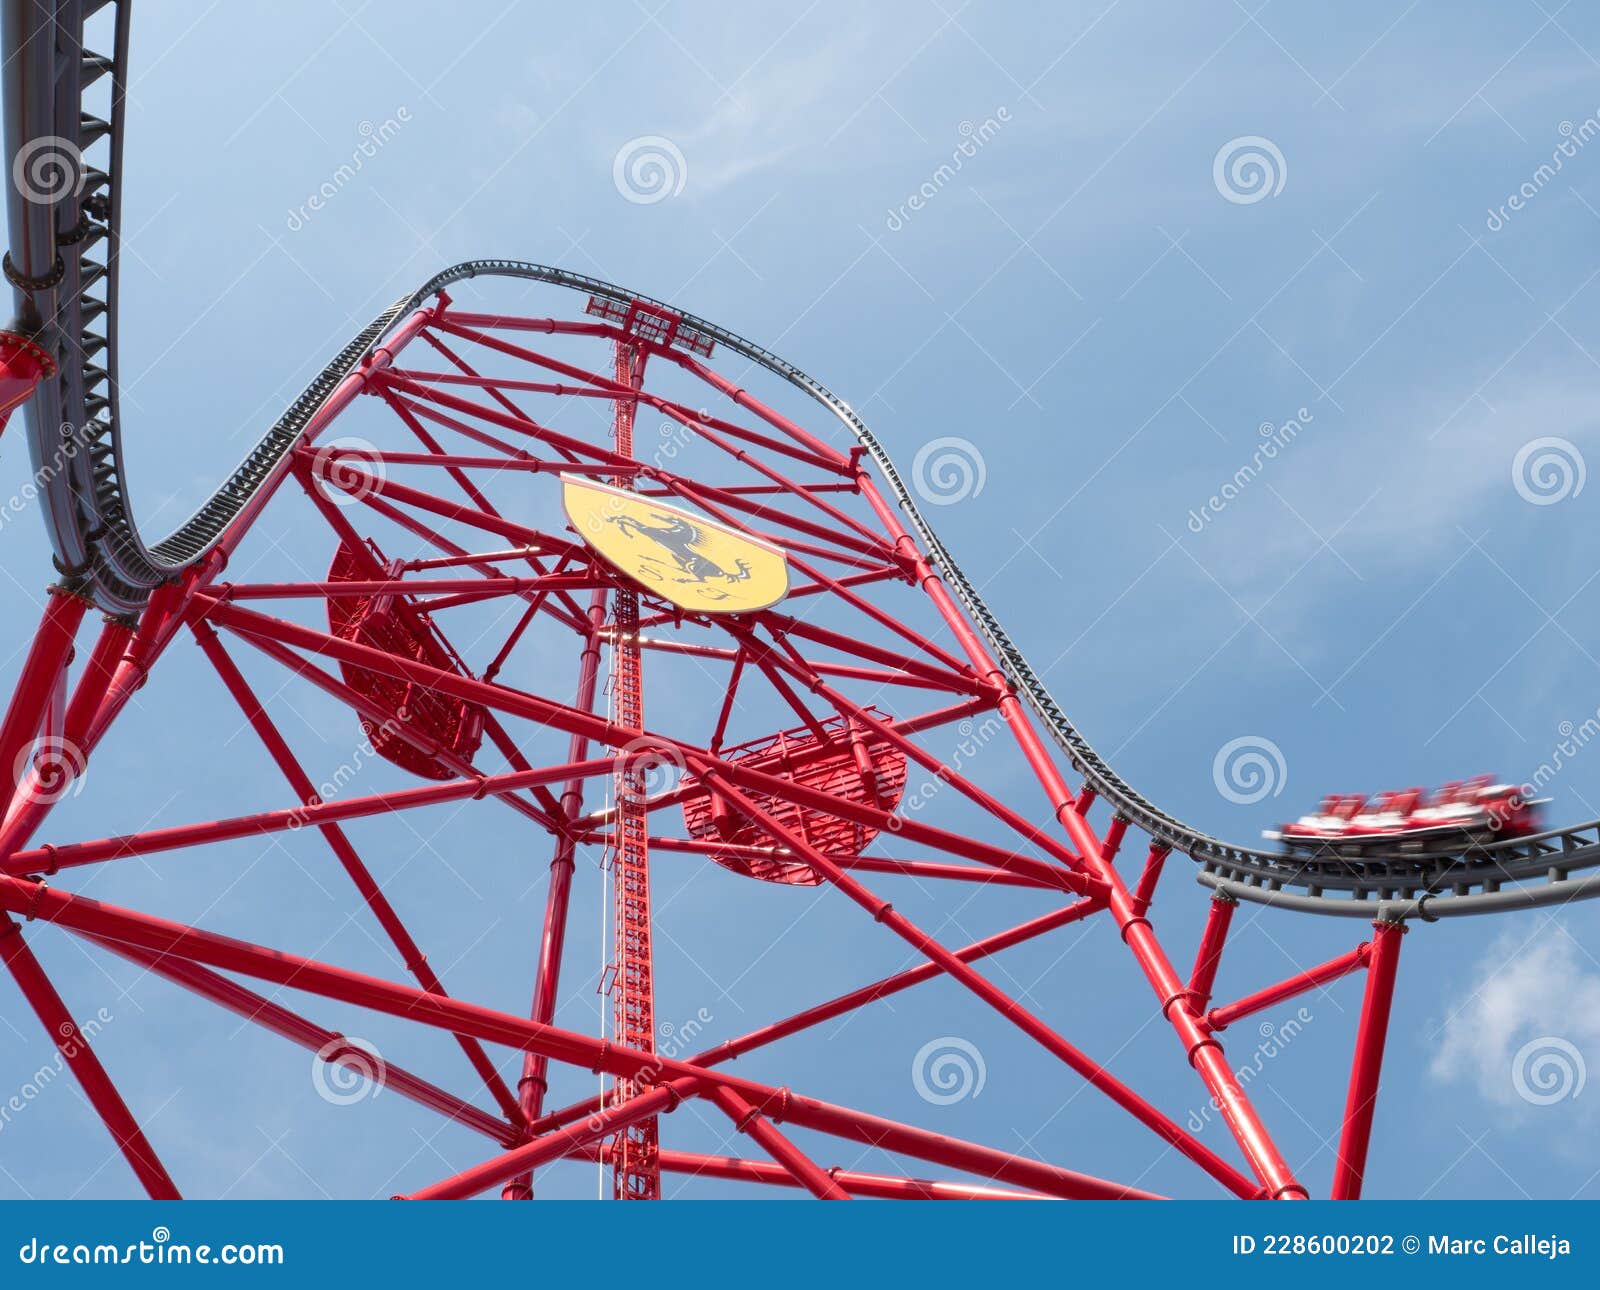 Red Force at Portaventura World Editorial Photography - Image of park, speed: 228600202